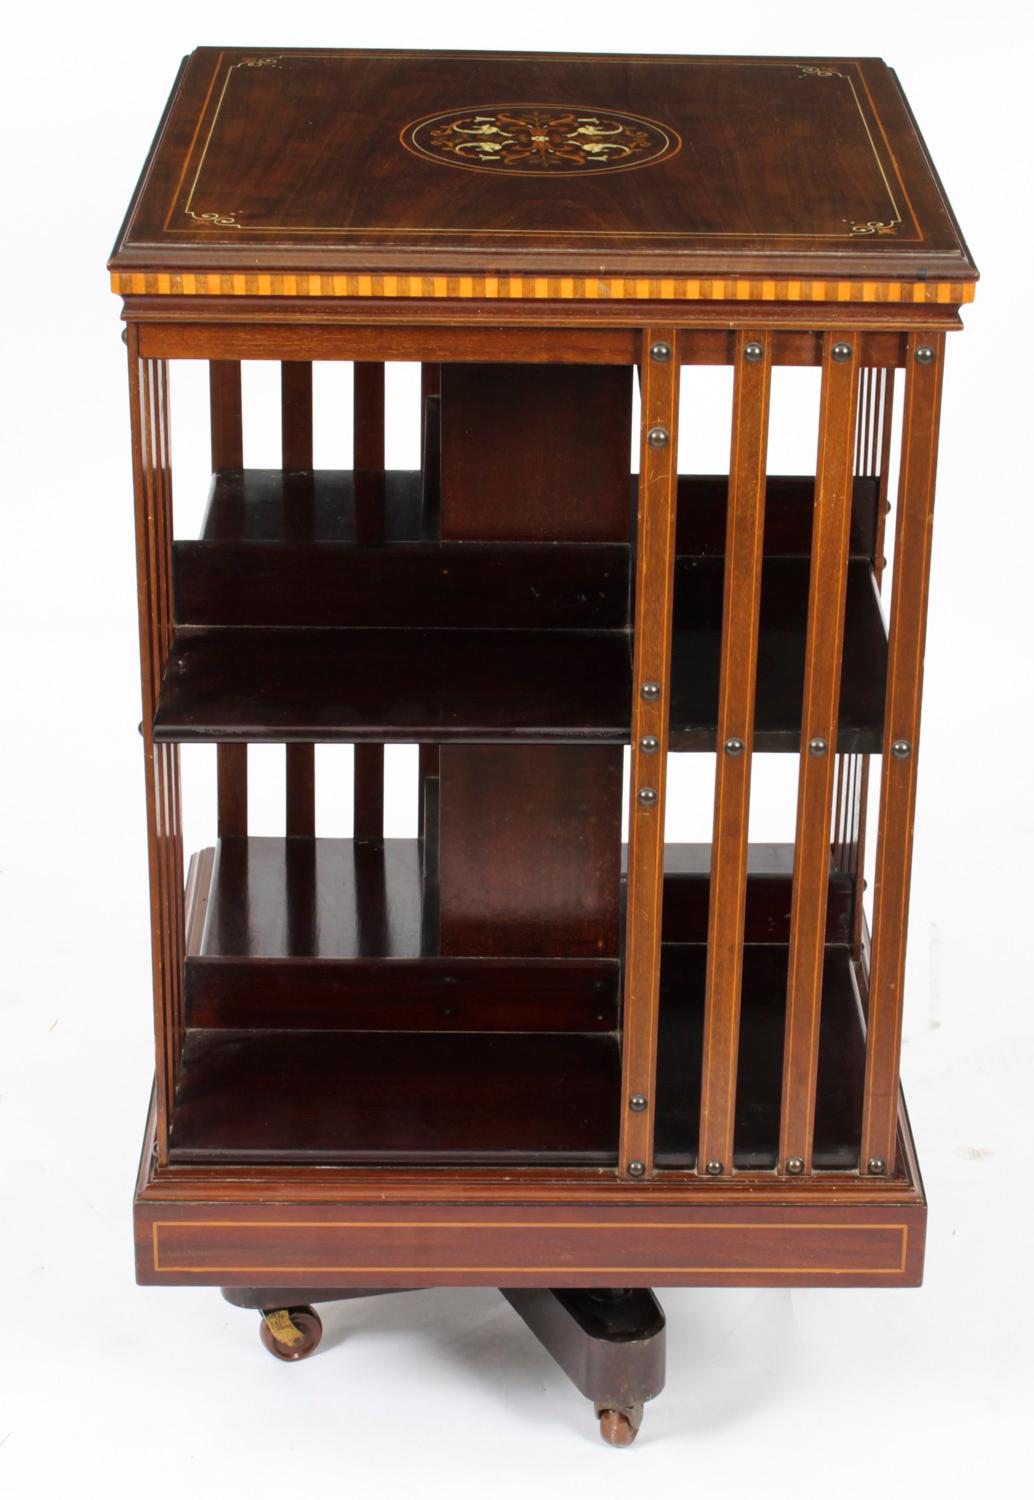 Antique Victorian Revolving Bookcase Flame Mahogany, 19th C In Good Condition For Sale In London, GB